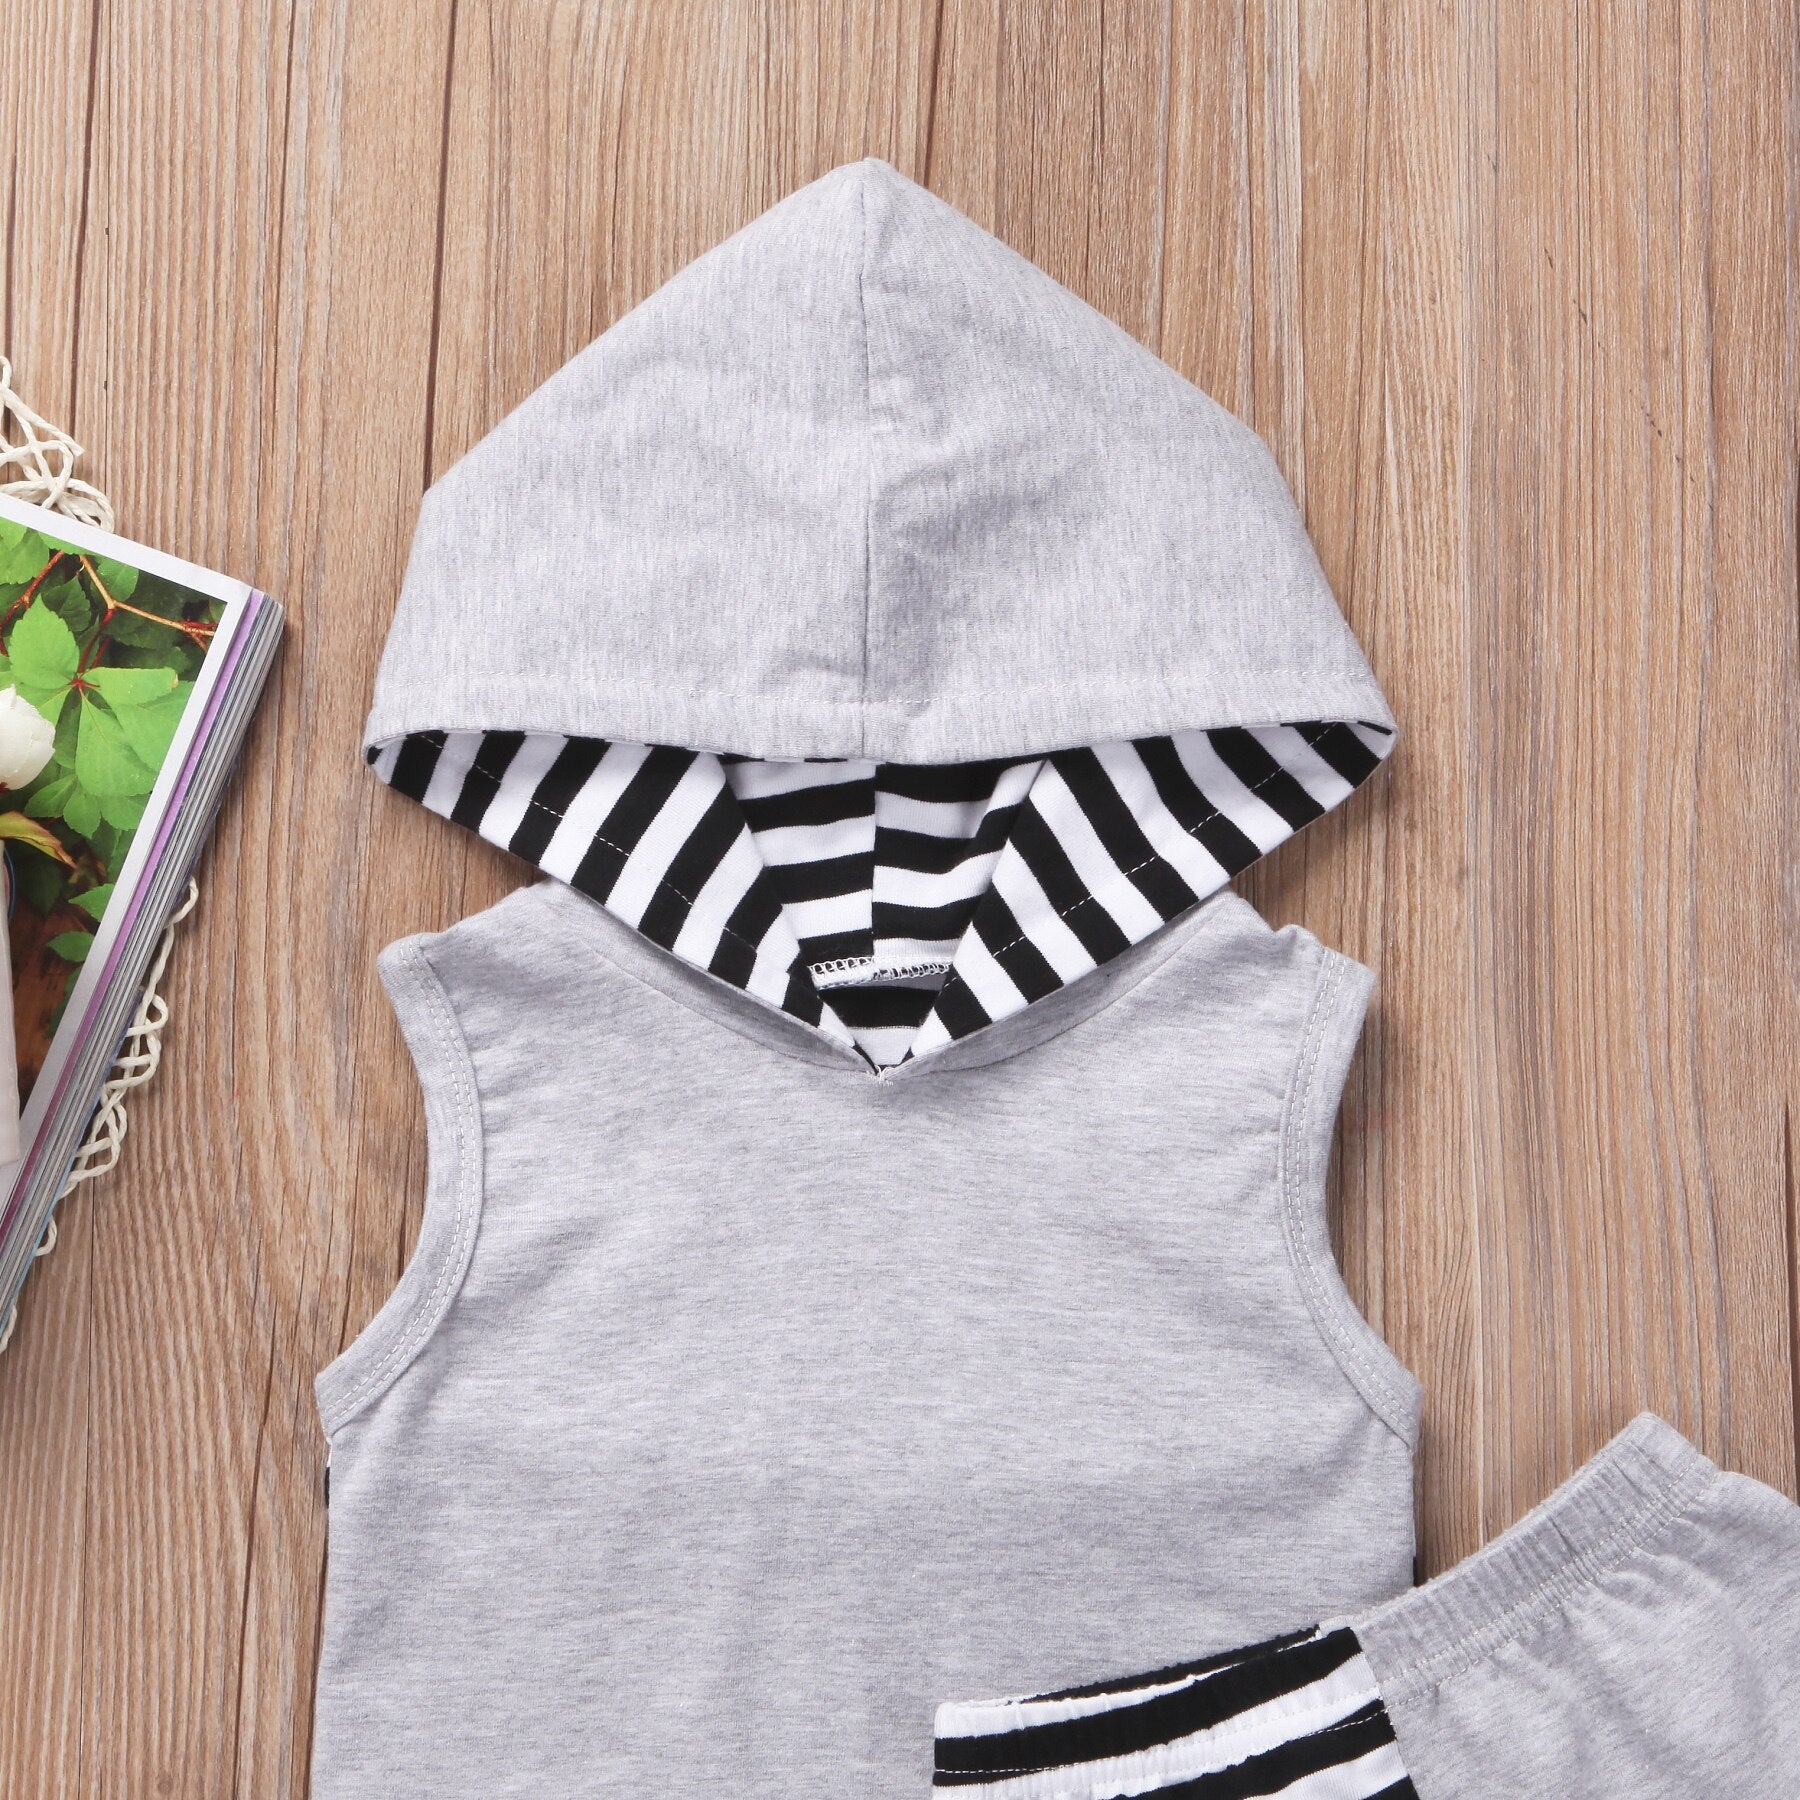 Toddler Infant Baby Boy Clothes Hooded Hoodie Striped Sleeveless Cotton Top Short Pant Outfit Set Summer - ebowsos